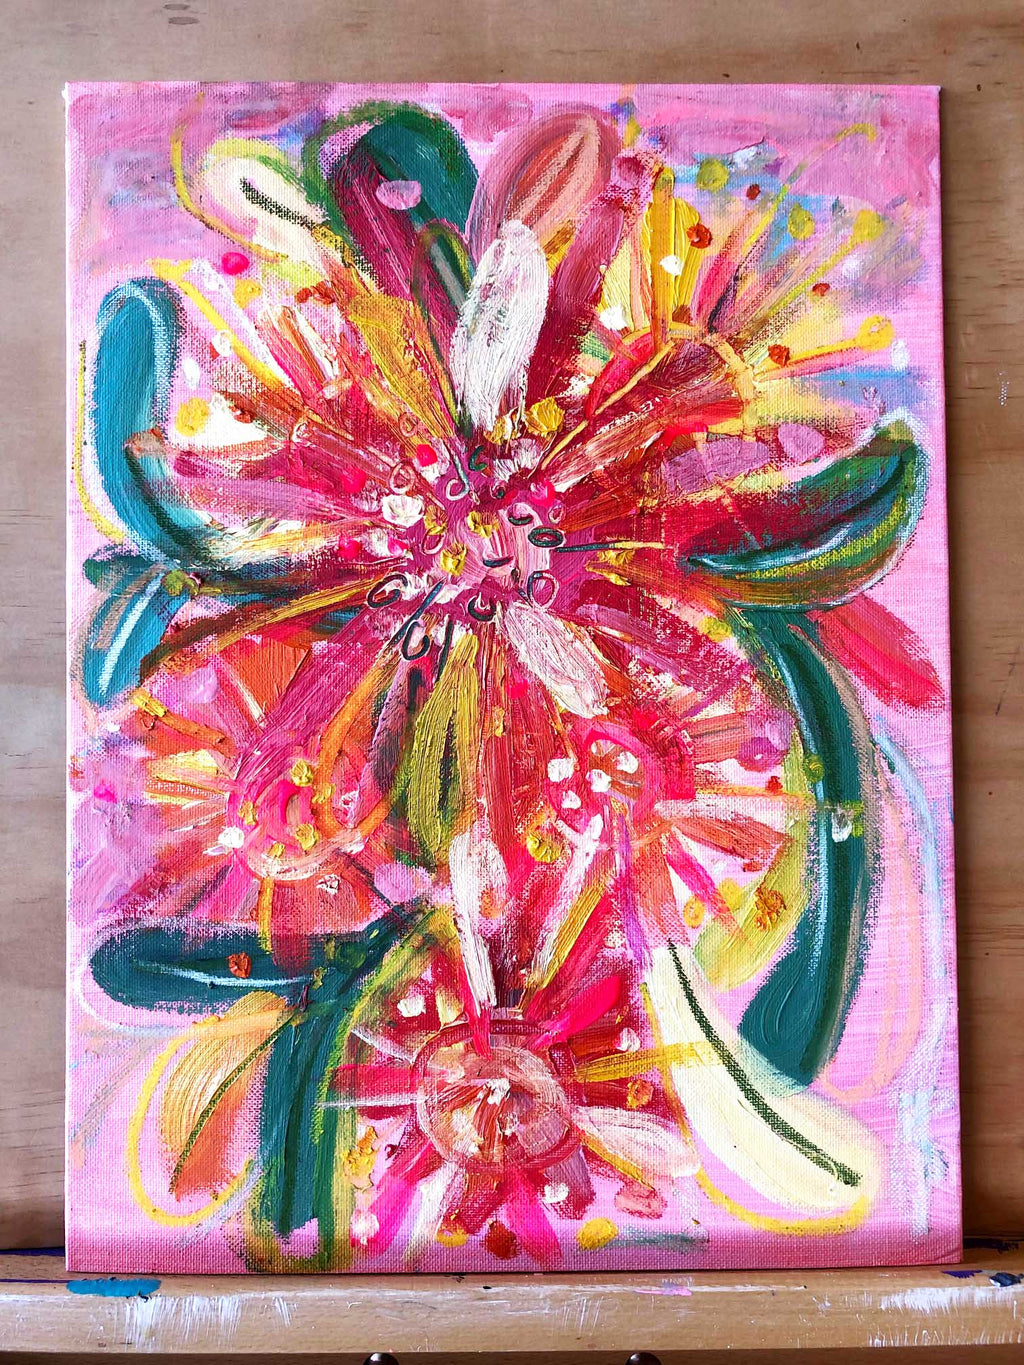 New! Blossom Mini Botanical Abstract Painting